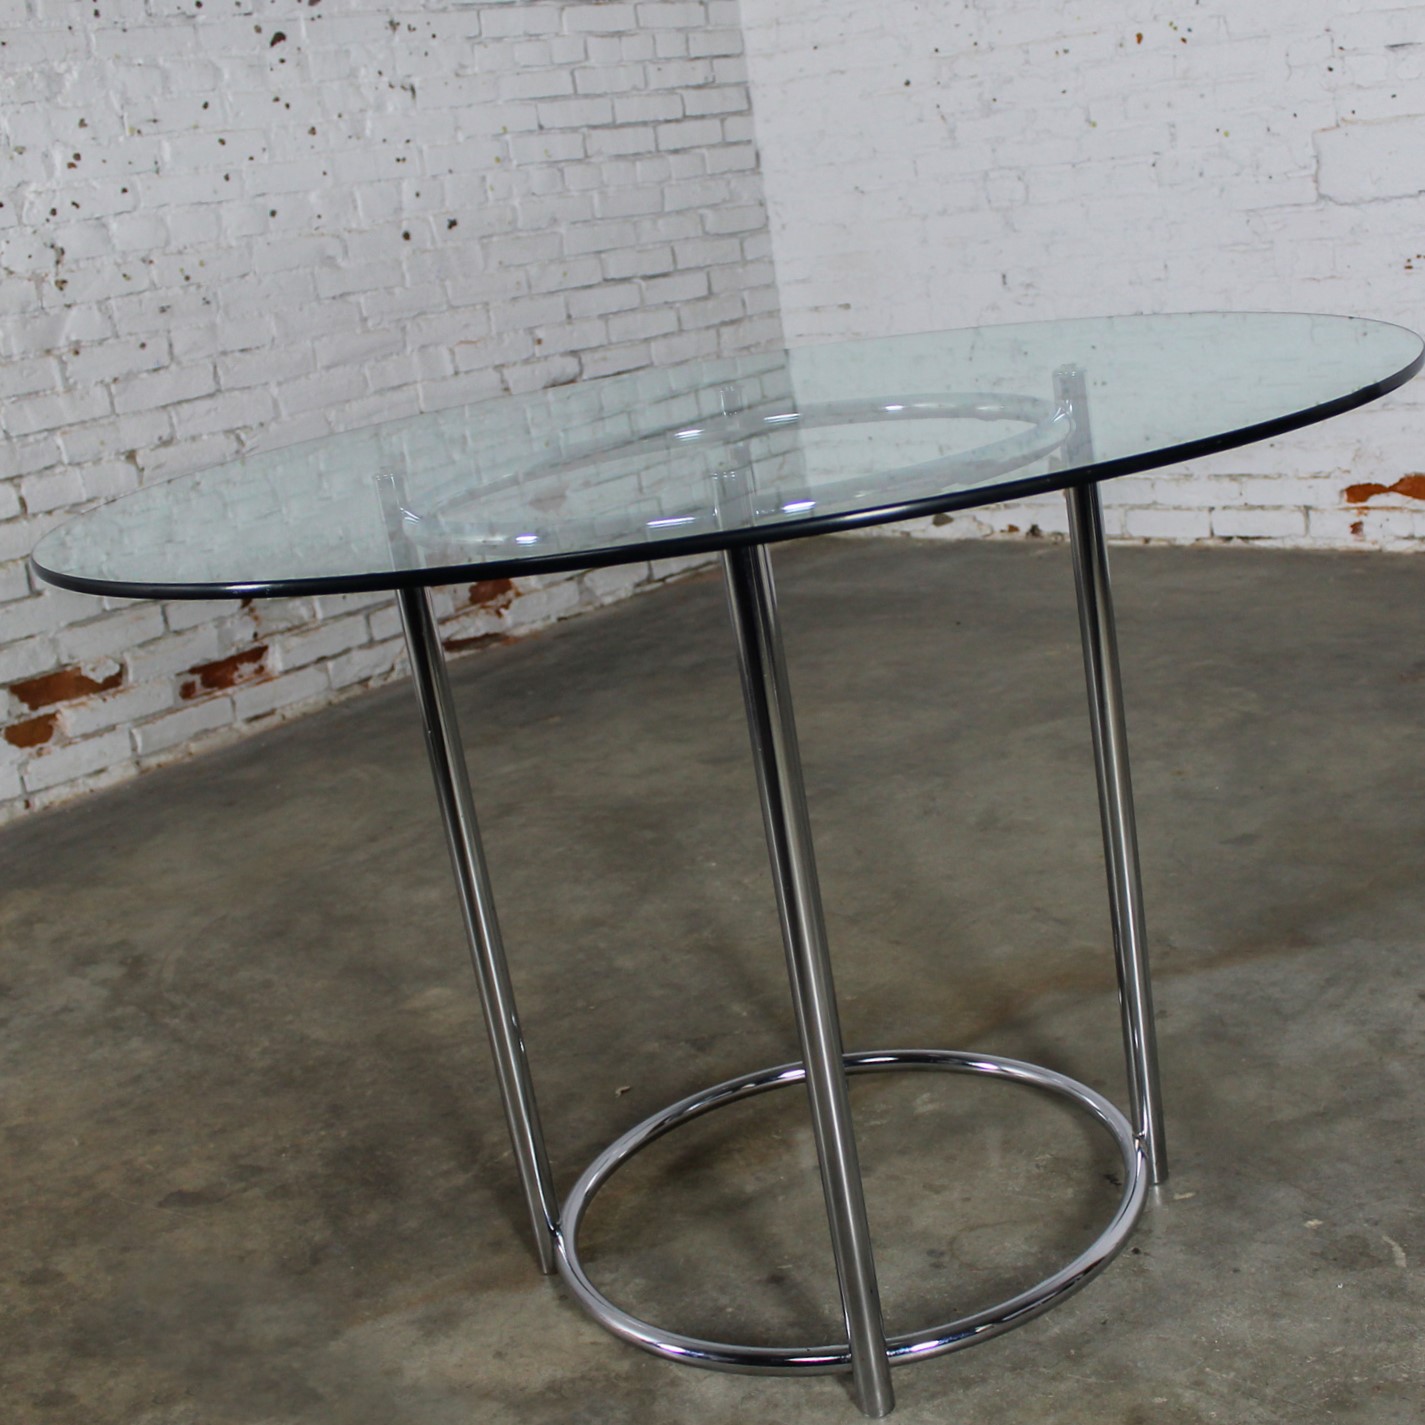 1980’s Modern Daystrom Dinette or Dining Table with Chrome Frame & Round Glass Top